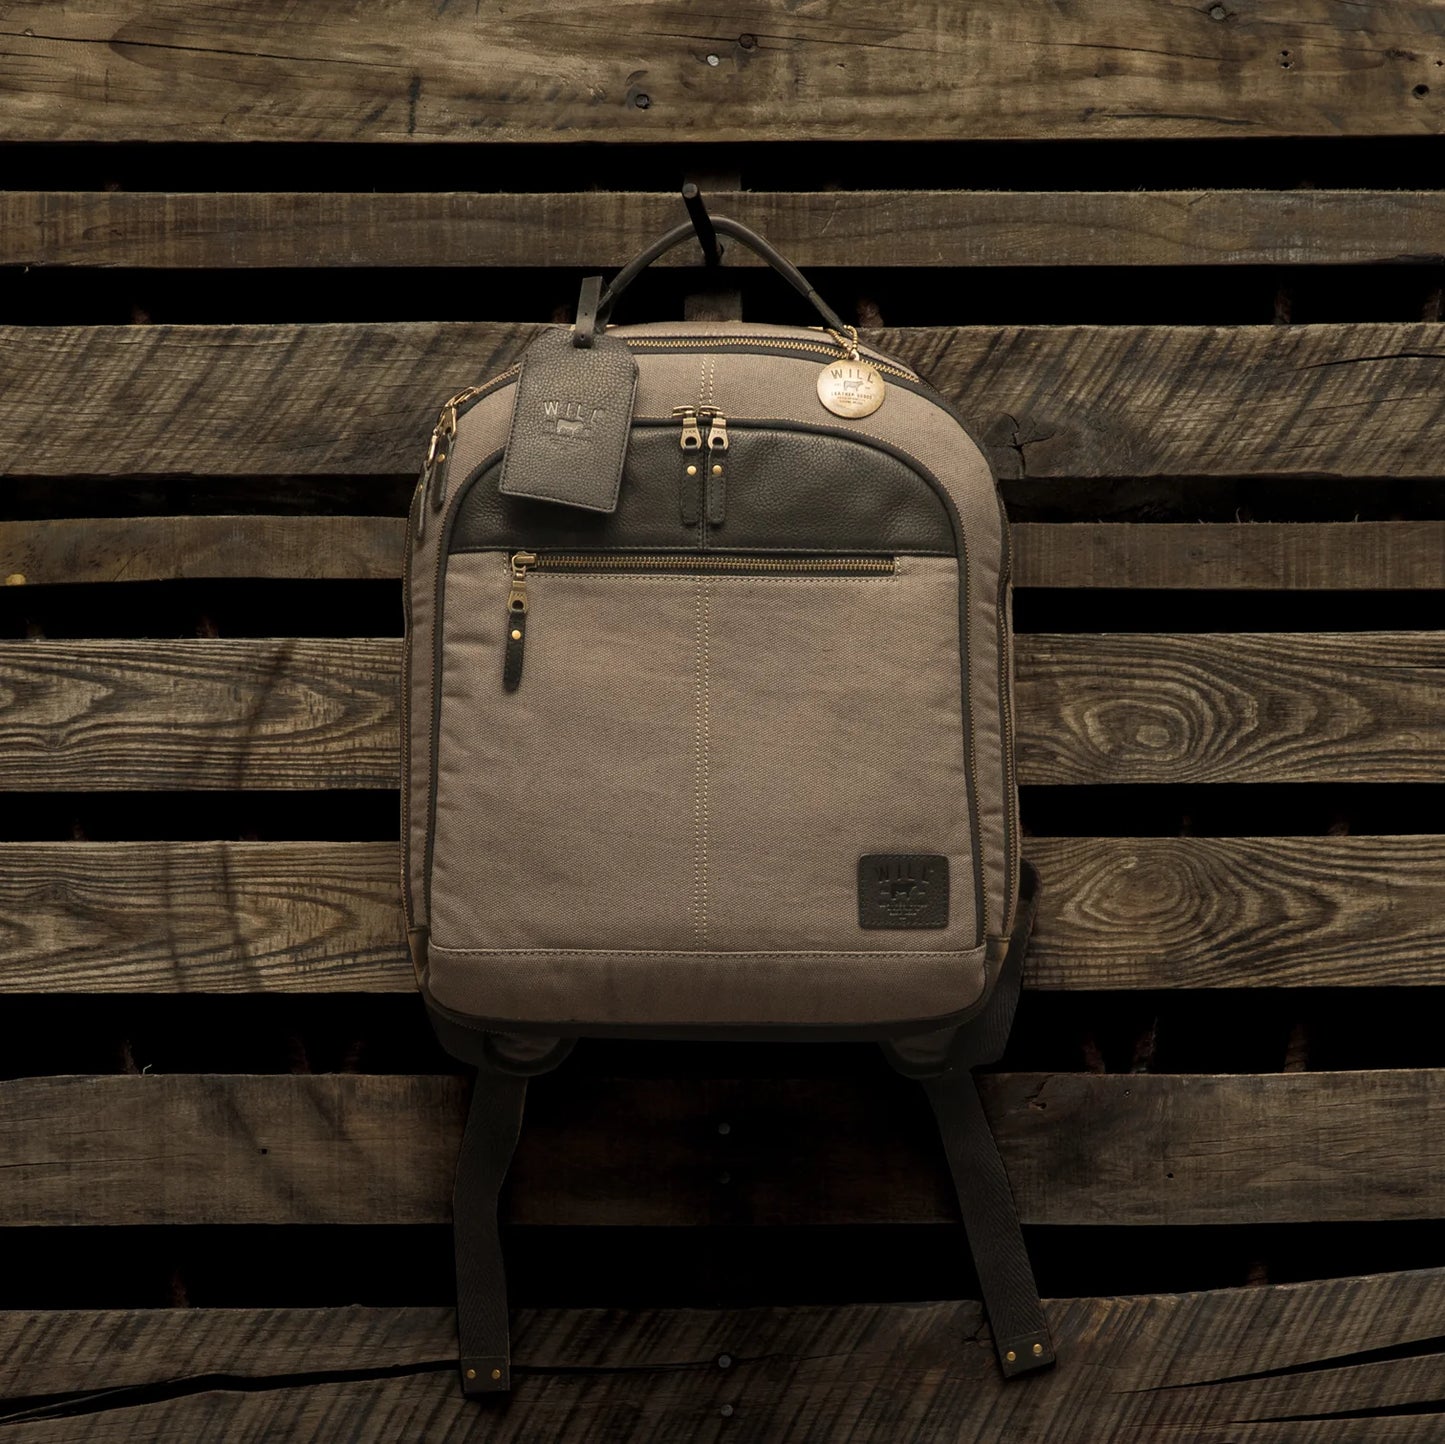 The Commuter Collection Backpack by Will Leather Goods in color Charcoal